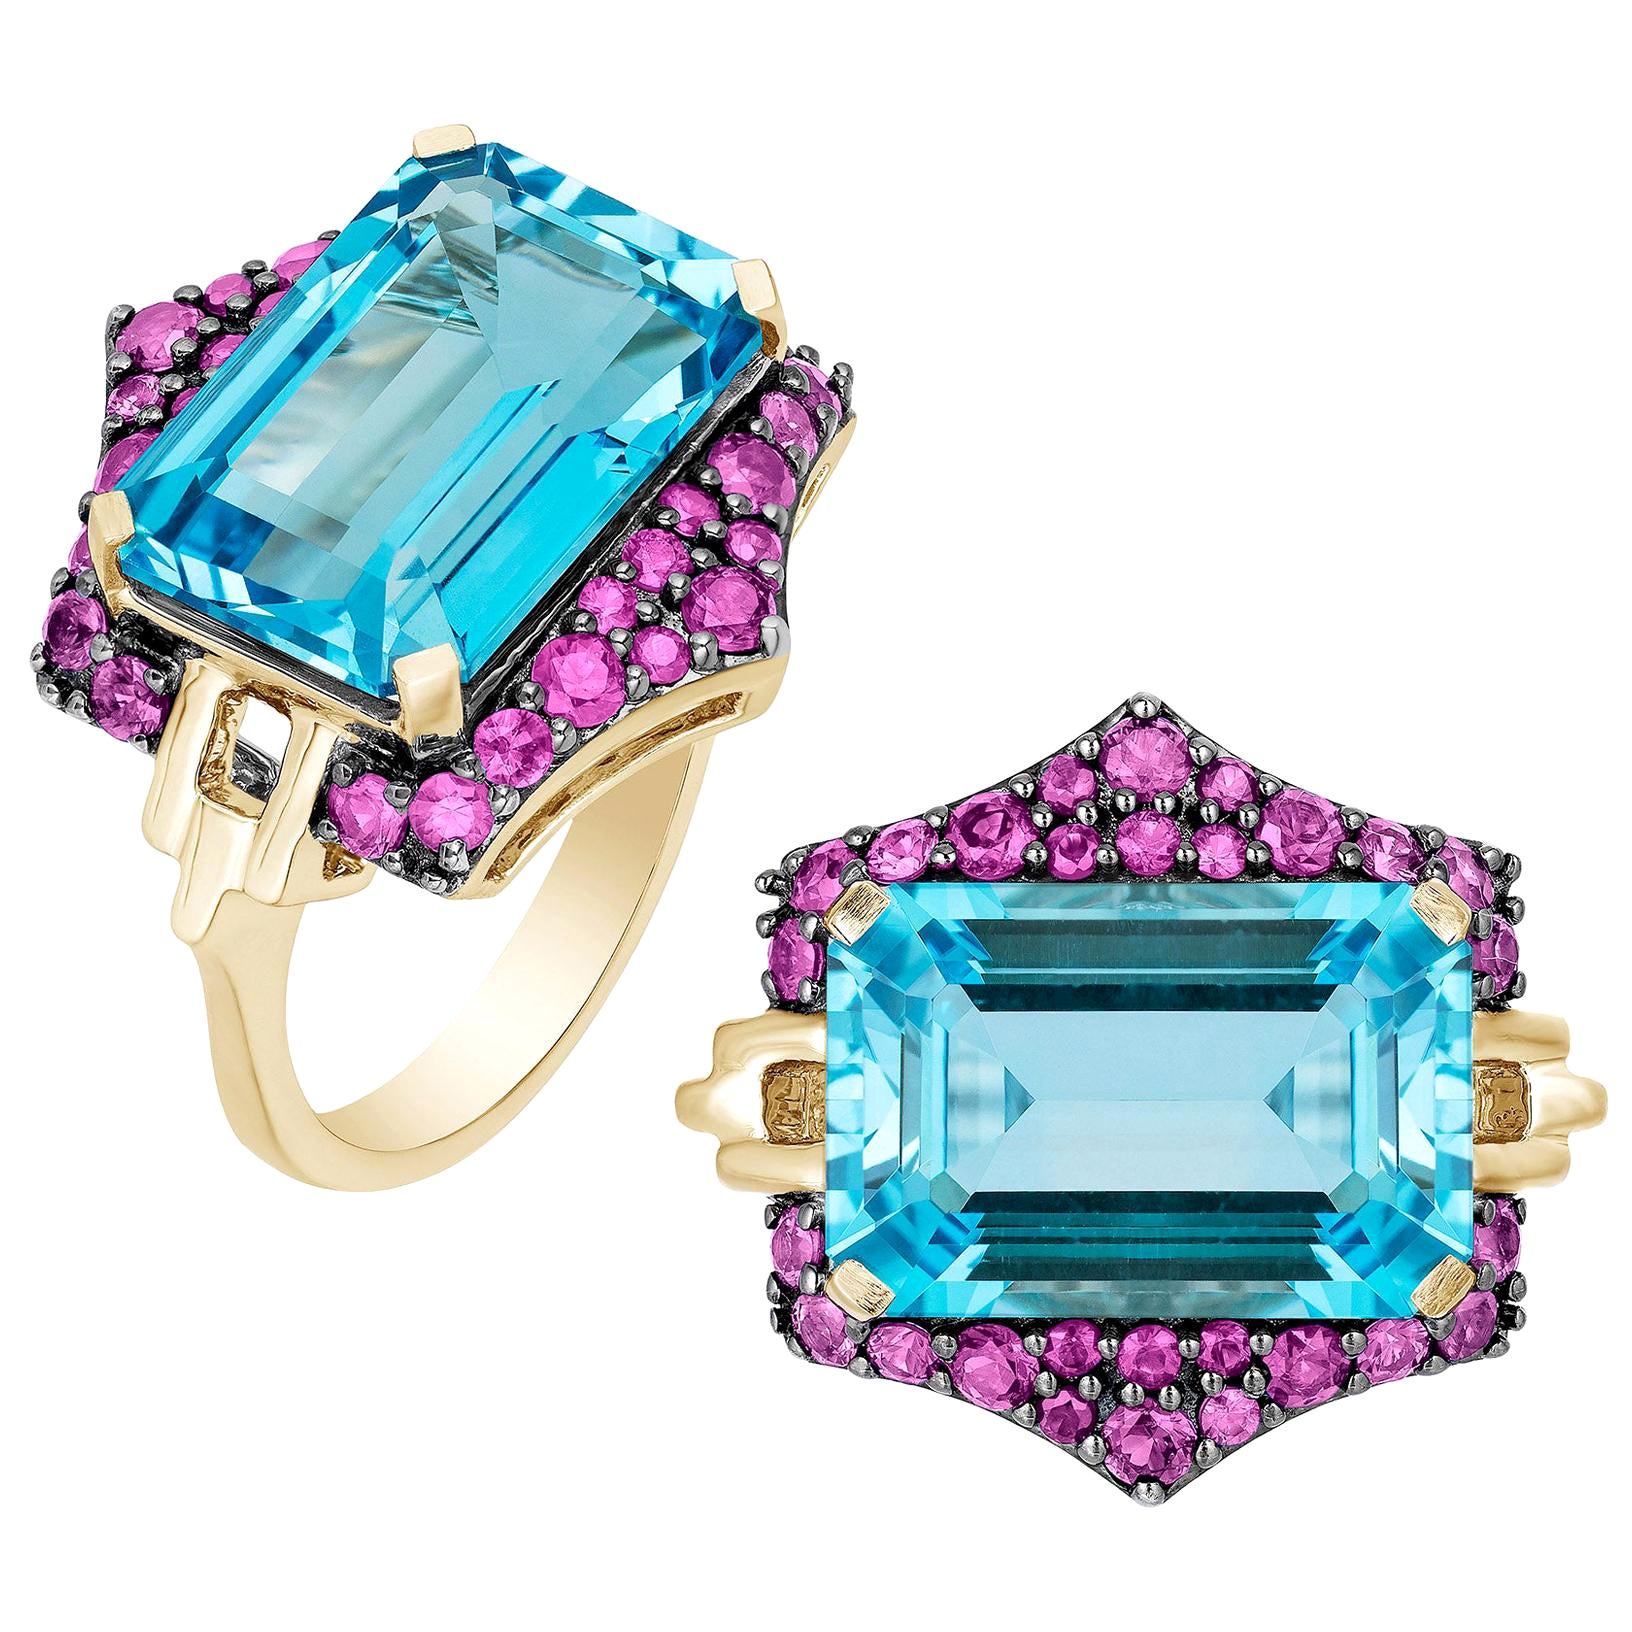 Goshwara Blue Topaz Emerald Cut with Pink Sapphires Ring For Sale